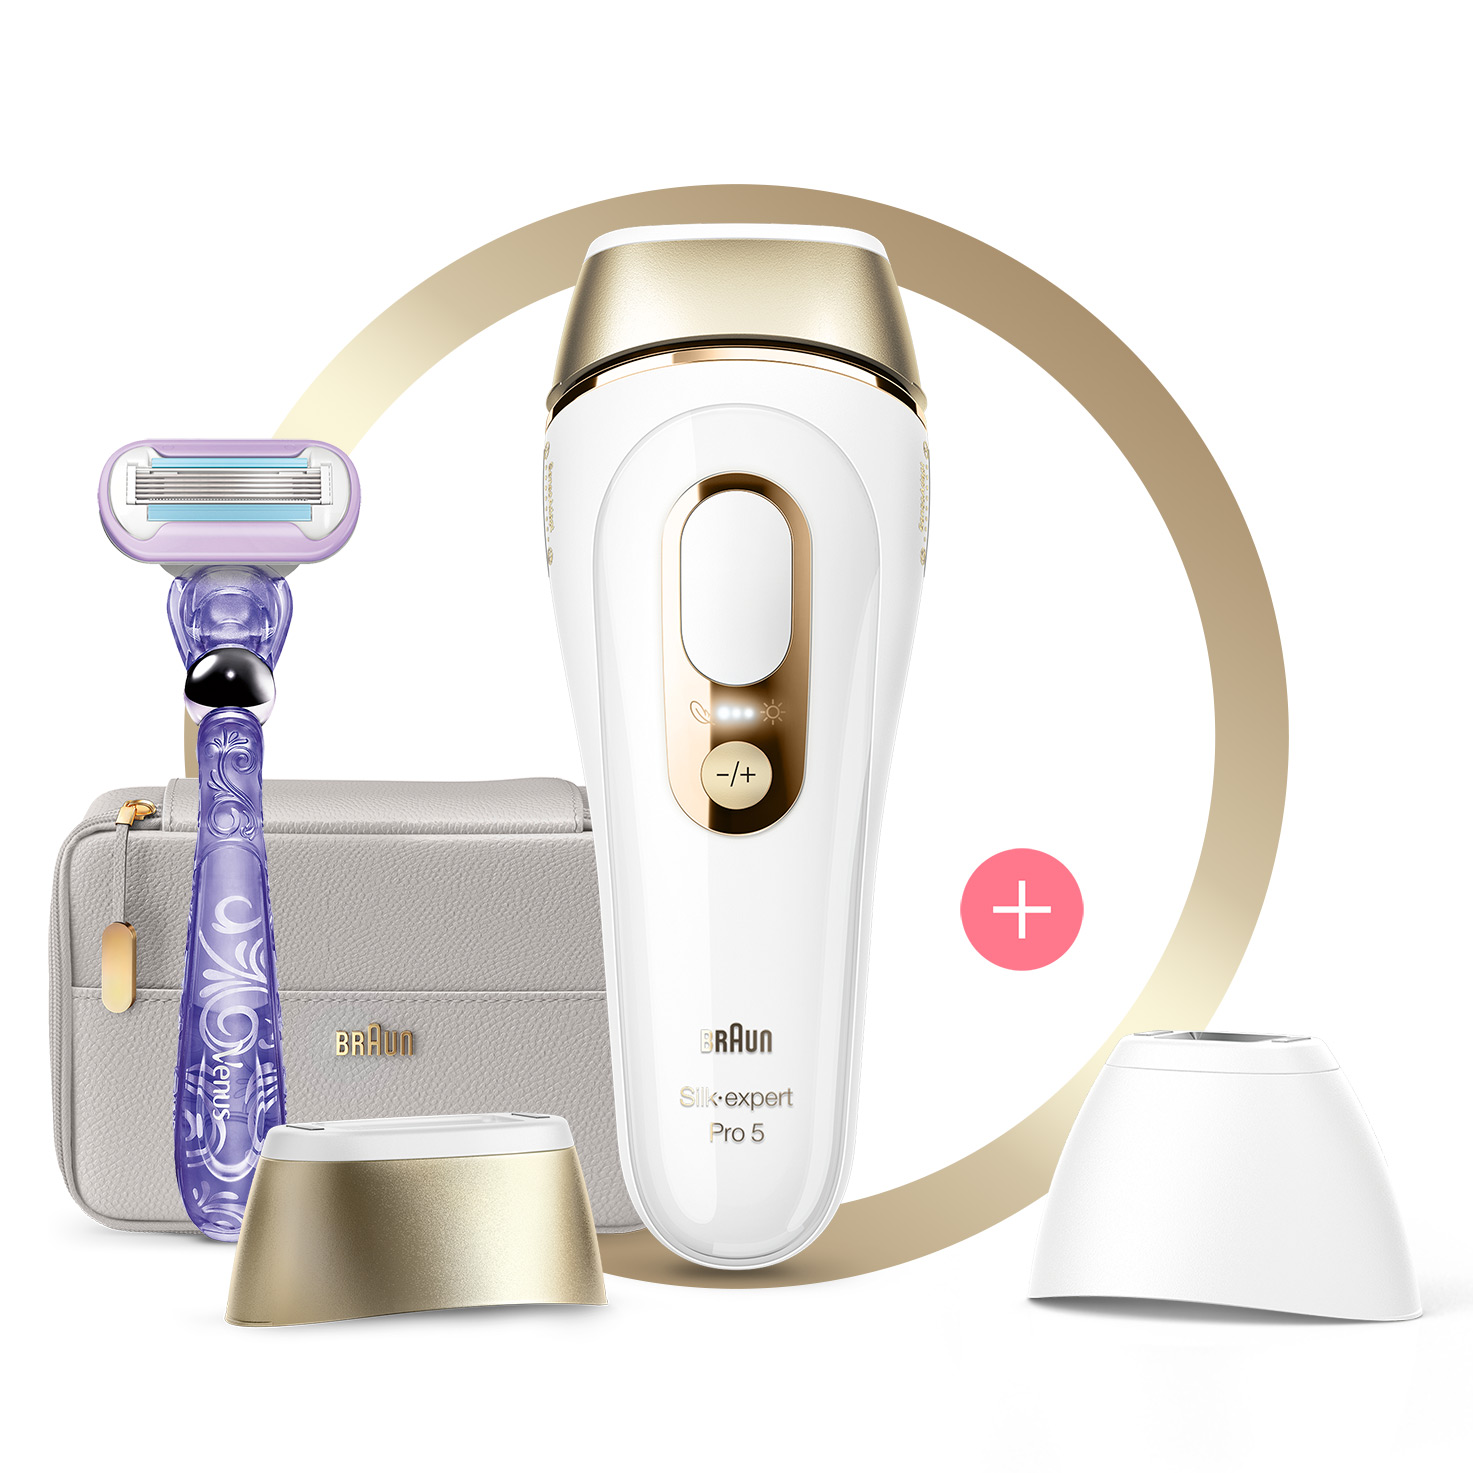 Braun IPL Silk-expert Pro 5 PL5129 with 4 extras: Precision Attachment,  Mini Facial Hair Remover, Venus Razor and Storage Pouch - Go Hairless